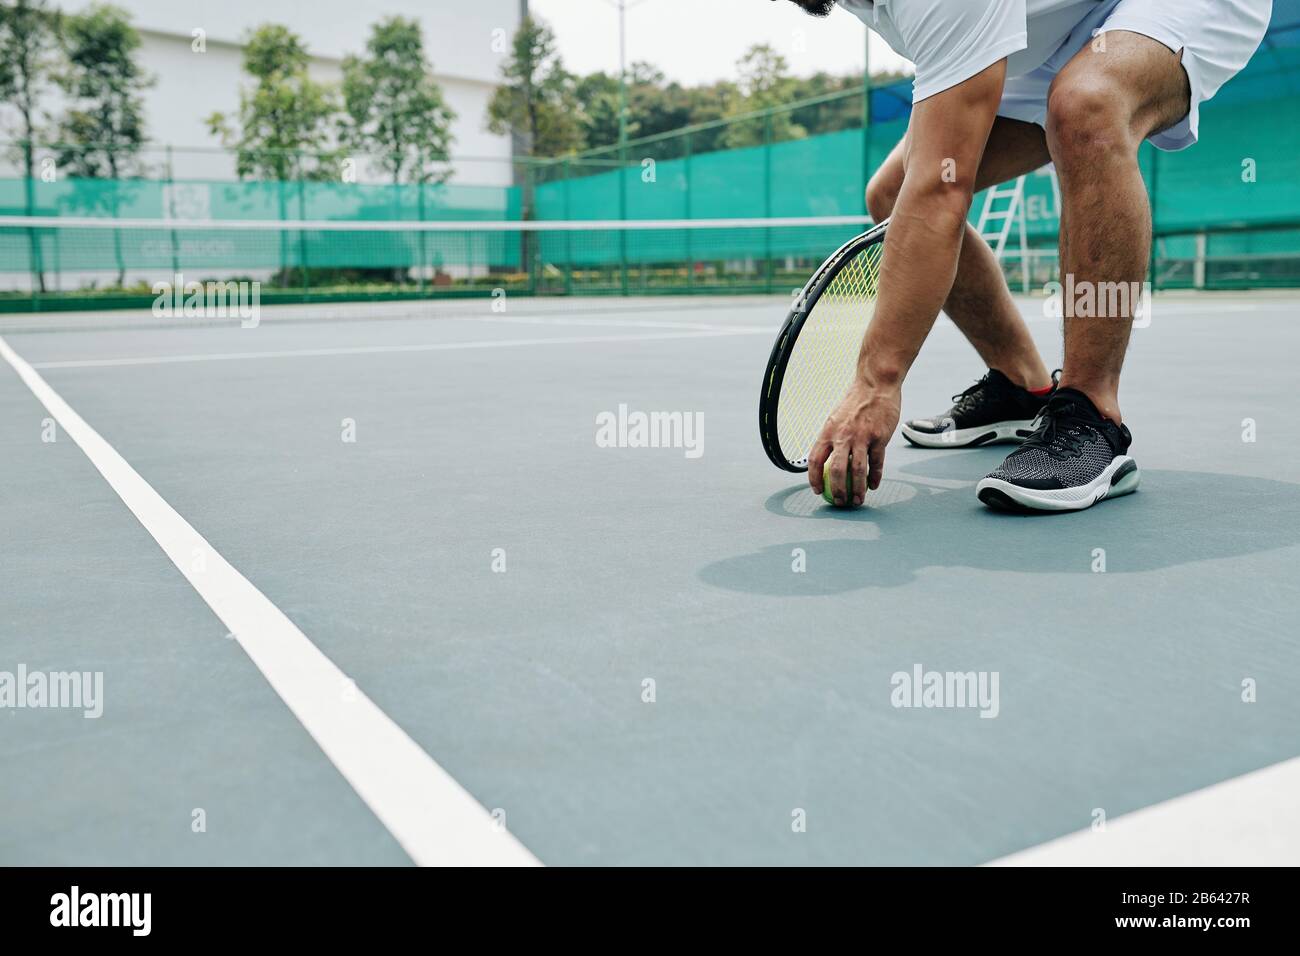 Tennis player bending to take ball from the ground Stock Photo